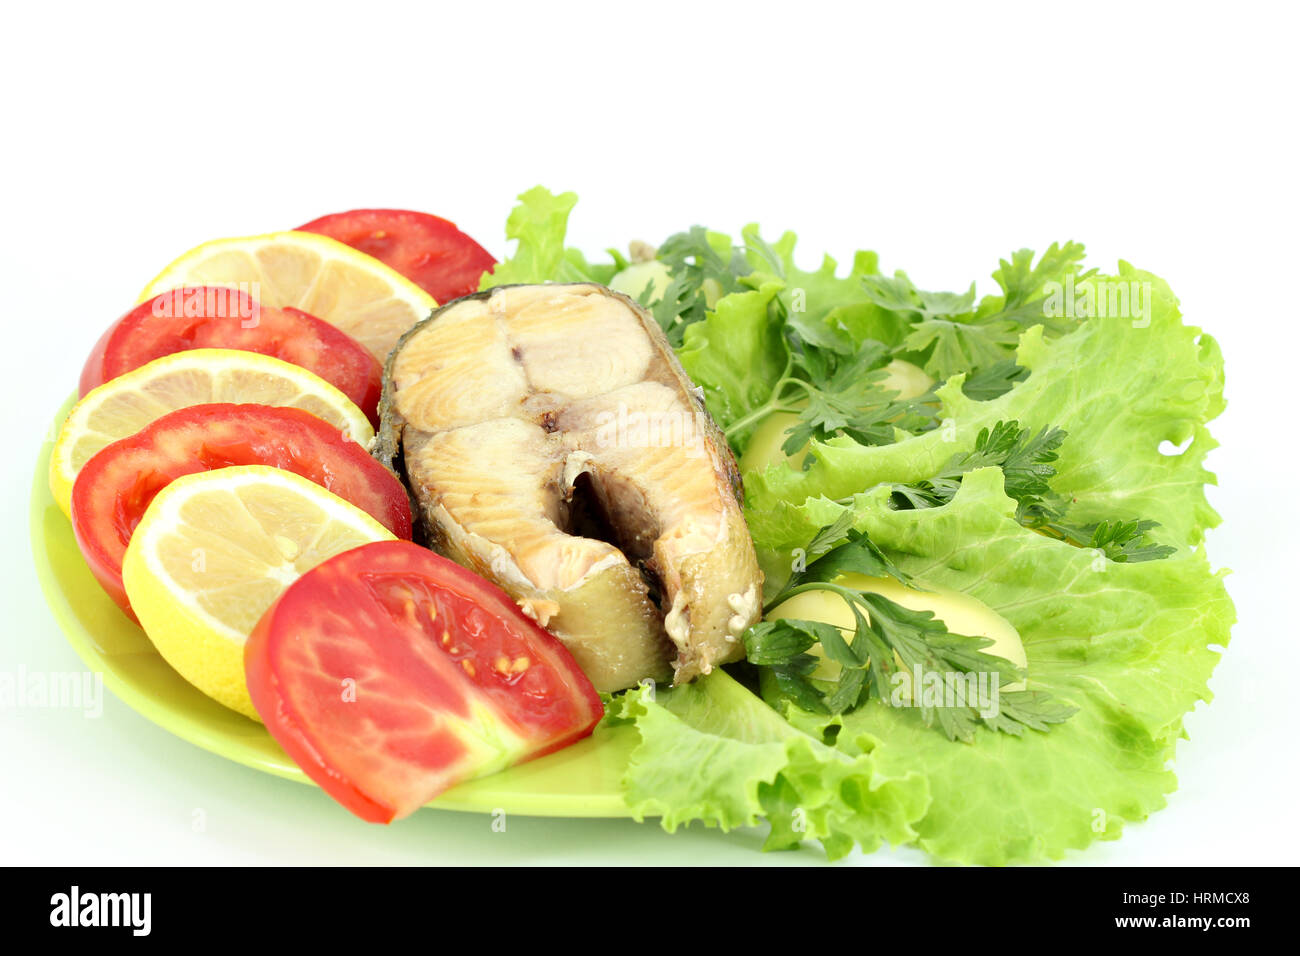 salmon with vegetables and salad Stock Photo